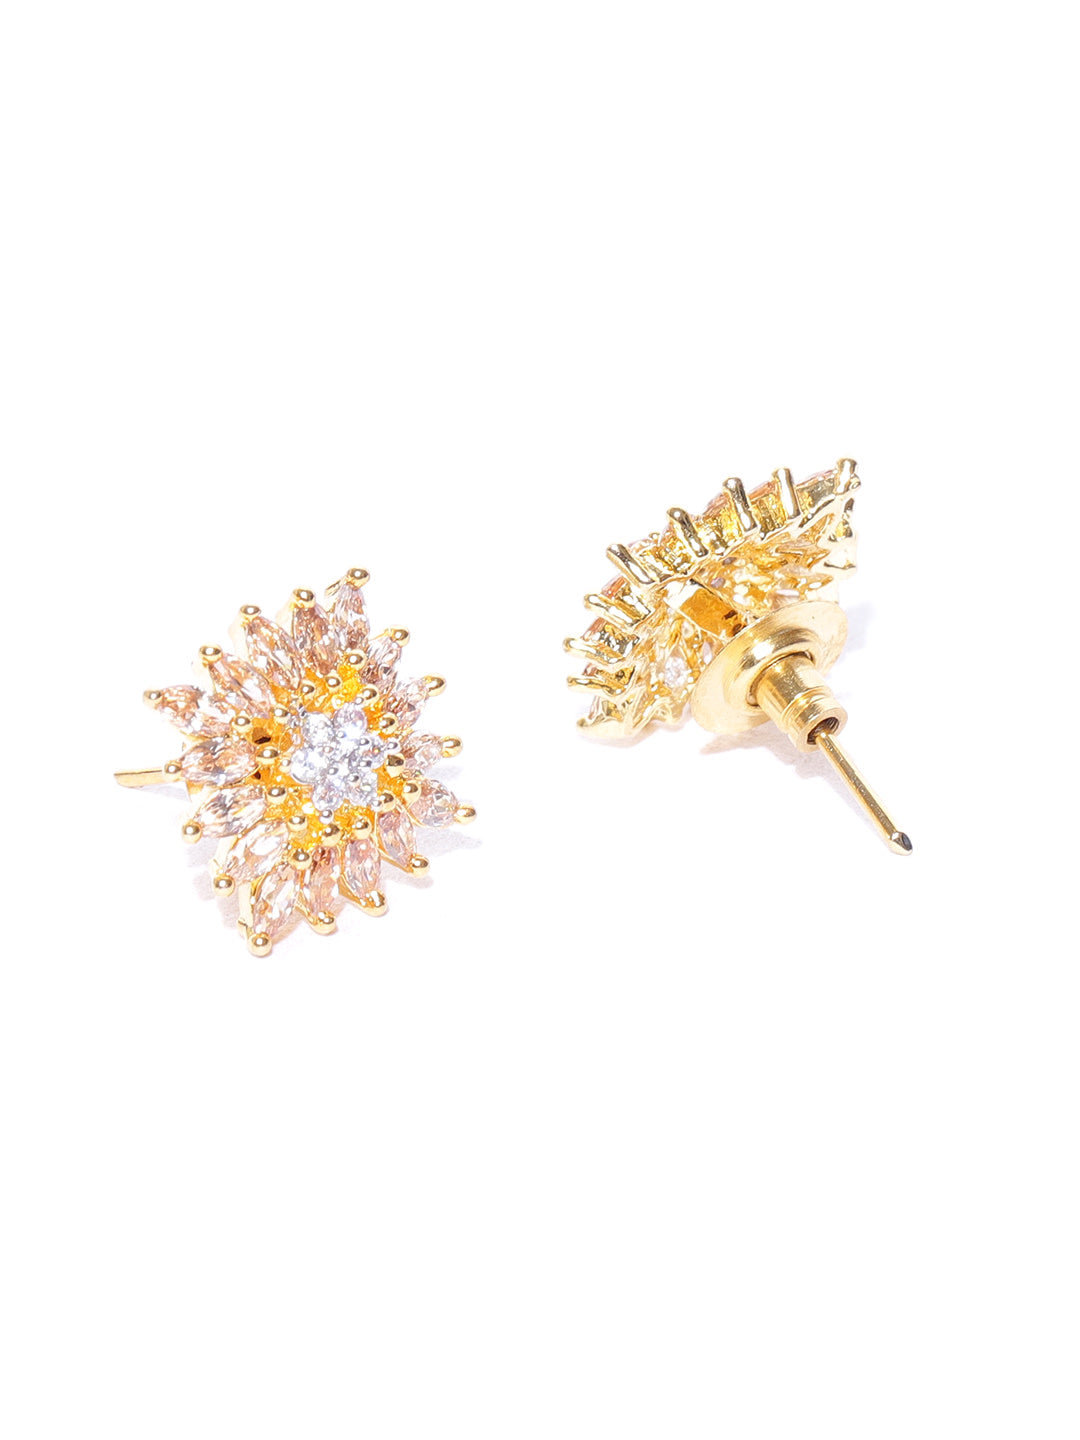 Classic Design Gold Plated American Diamond Stud Earring For Women And Girls